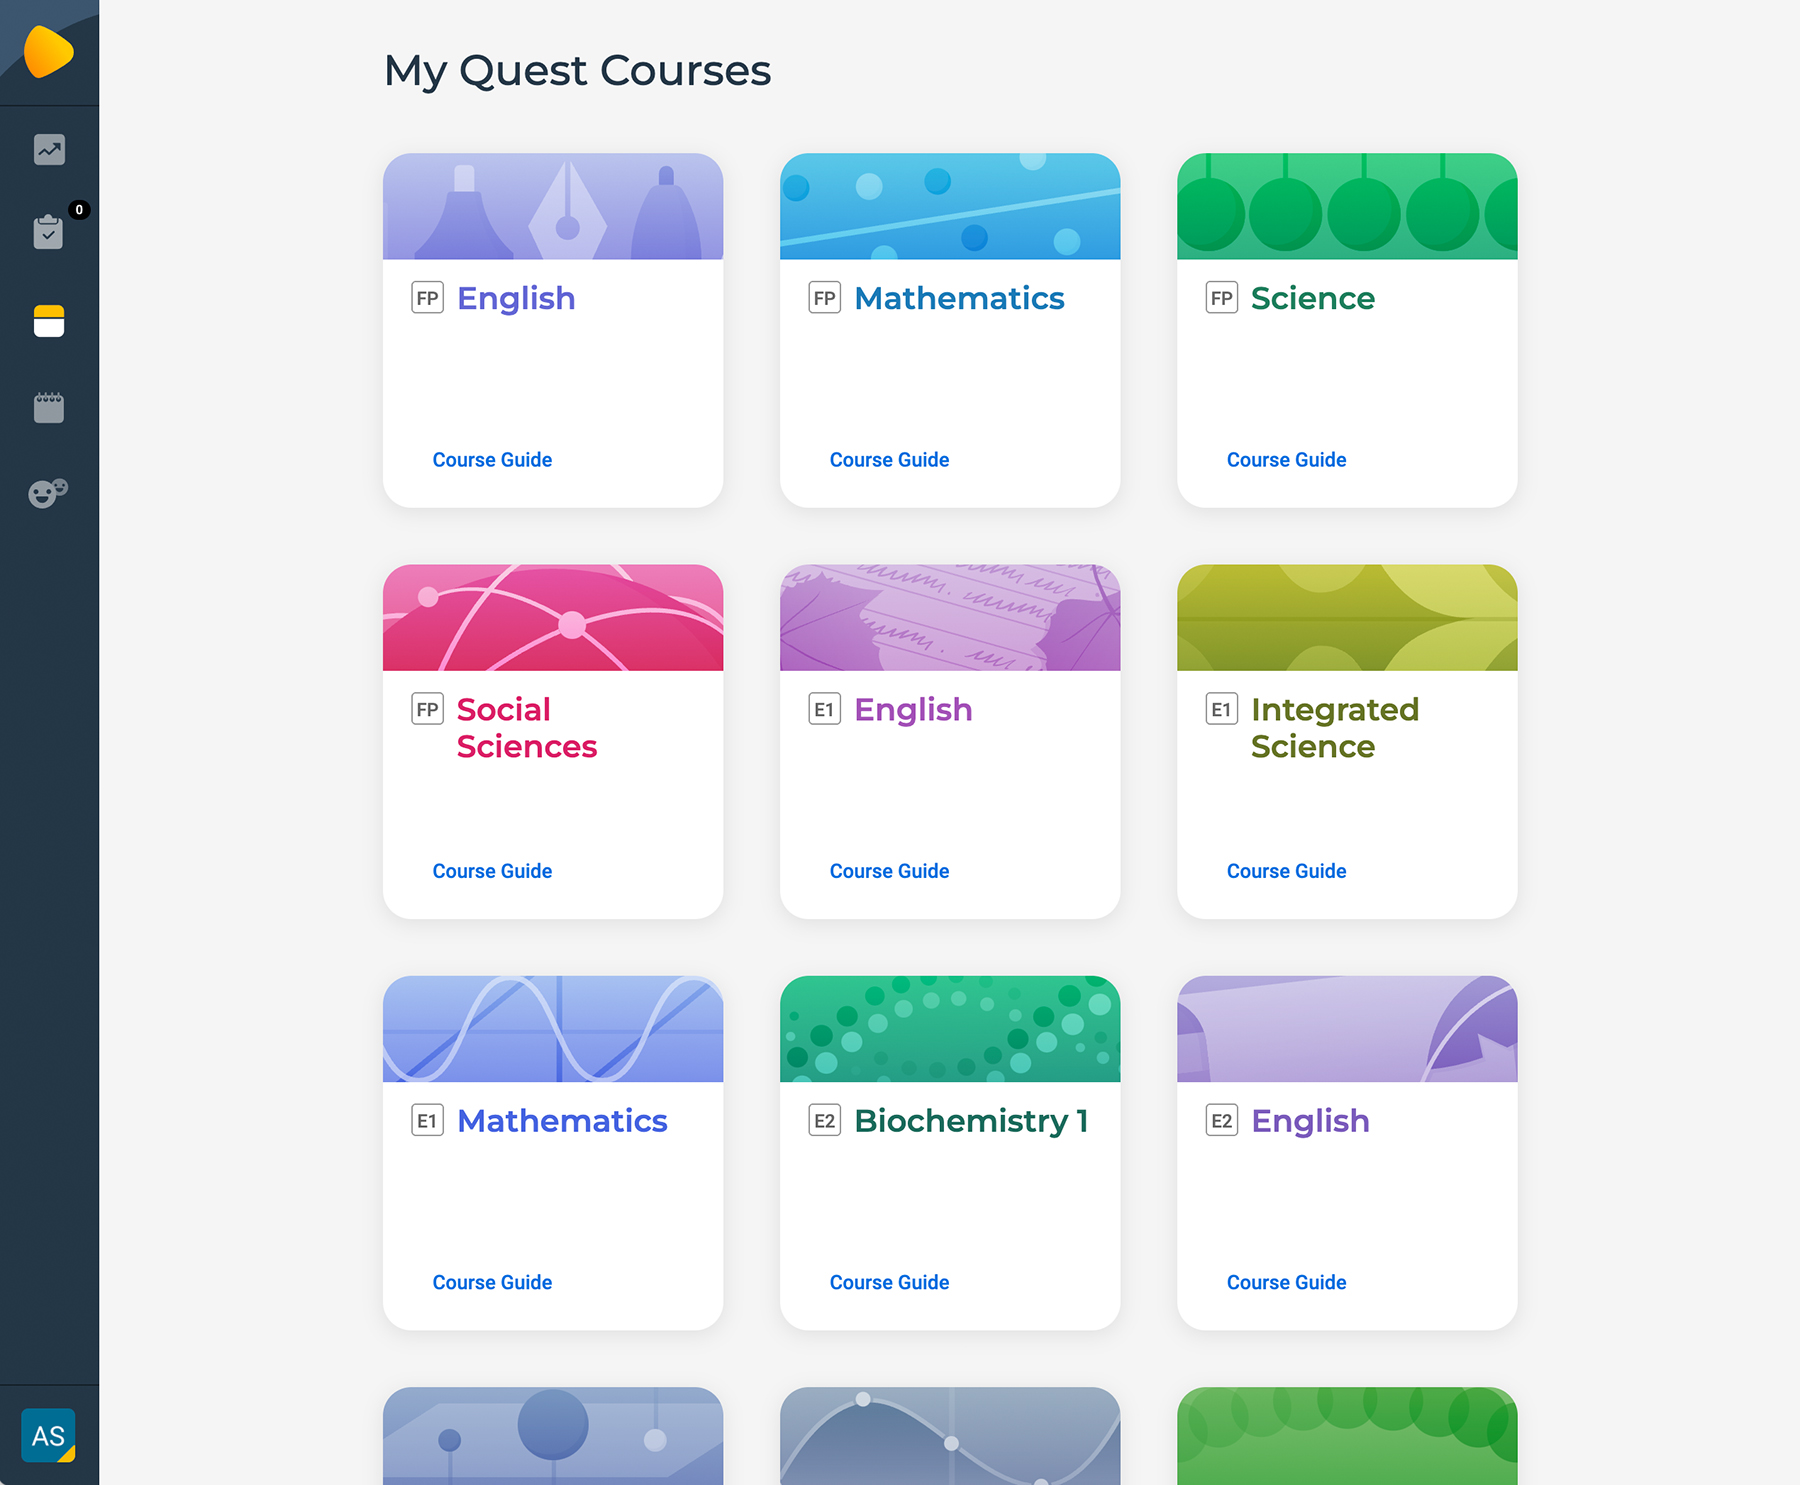 A screenshot from the Quest Forward LMS displays a sampling of courses offered in the Quest Forward curriculum.